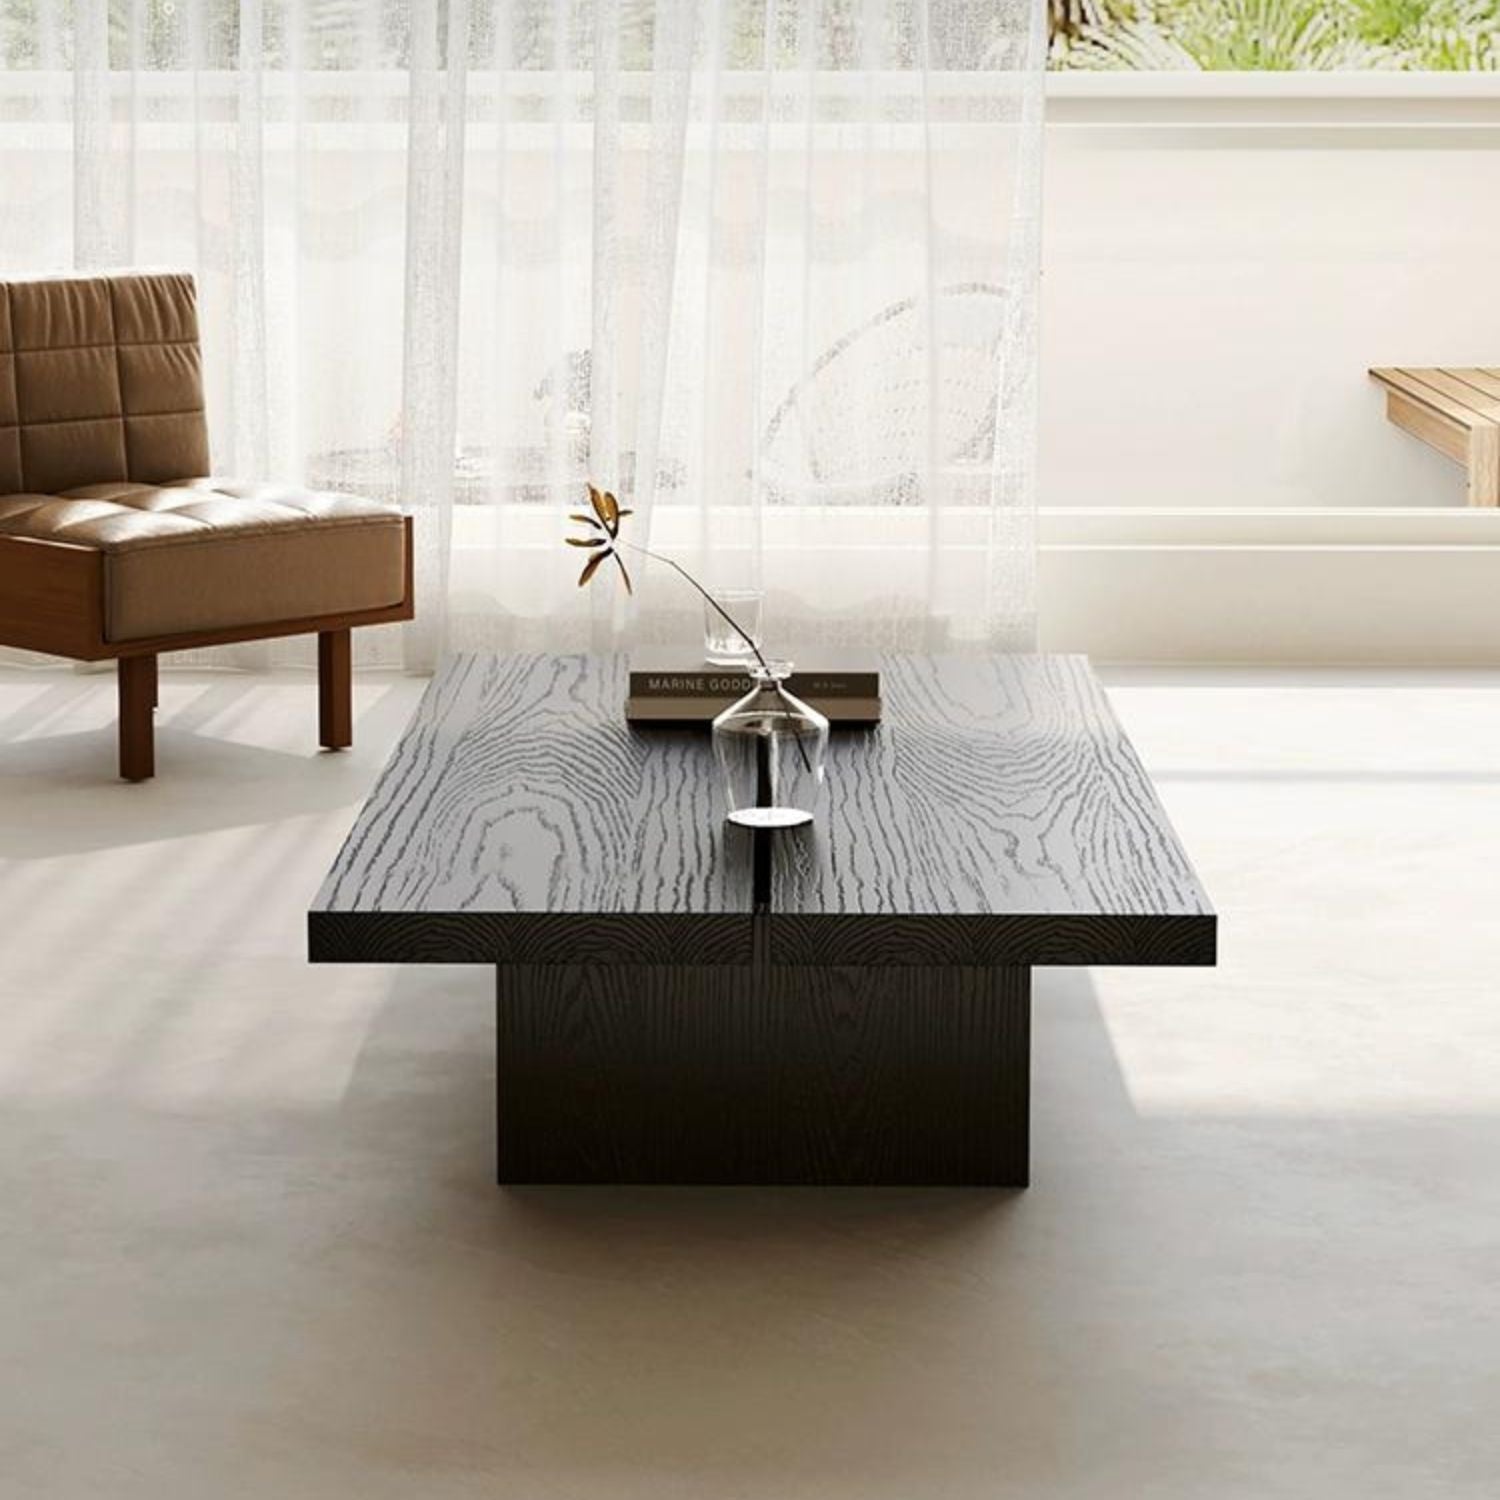 Ivy Coffee Table, Coffee Table, Valyōu Furniture | Valyou Furniture 